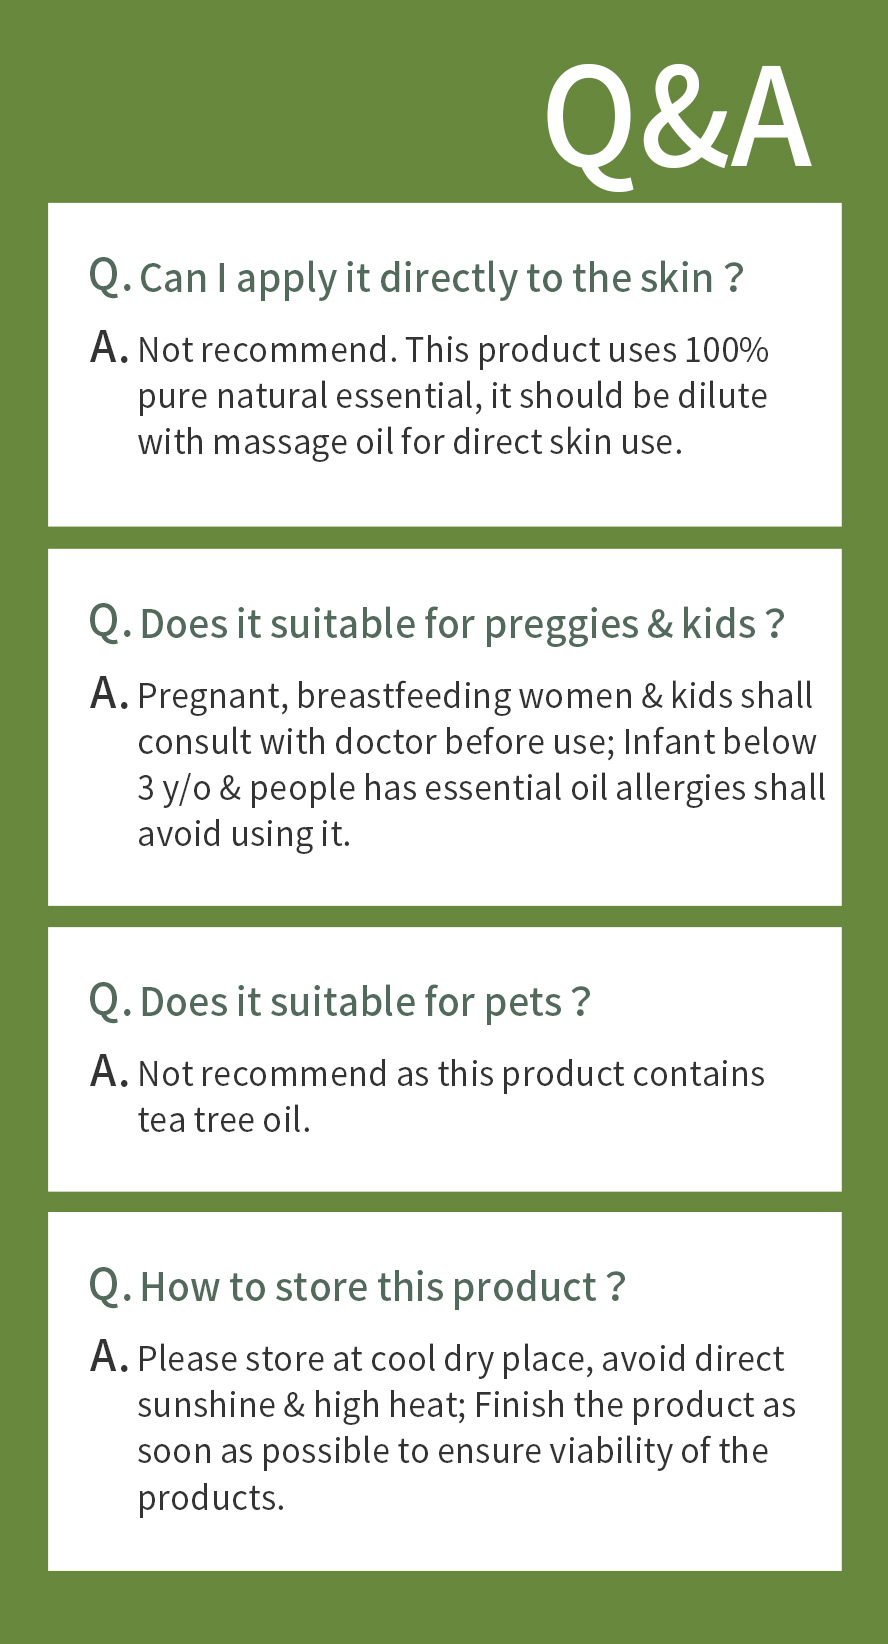 BHK's Essential Oil cannot be used on pets & not recommended to apply it directly on skin